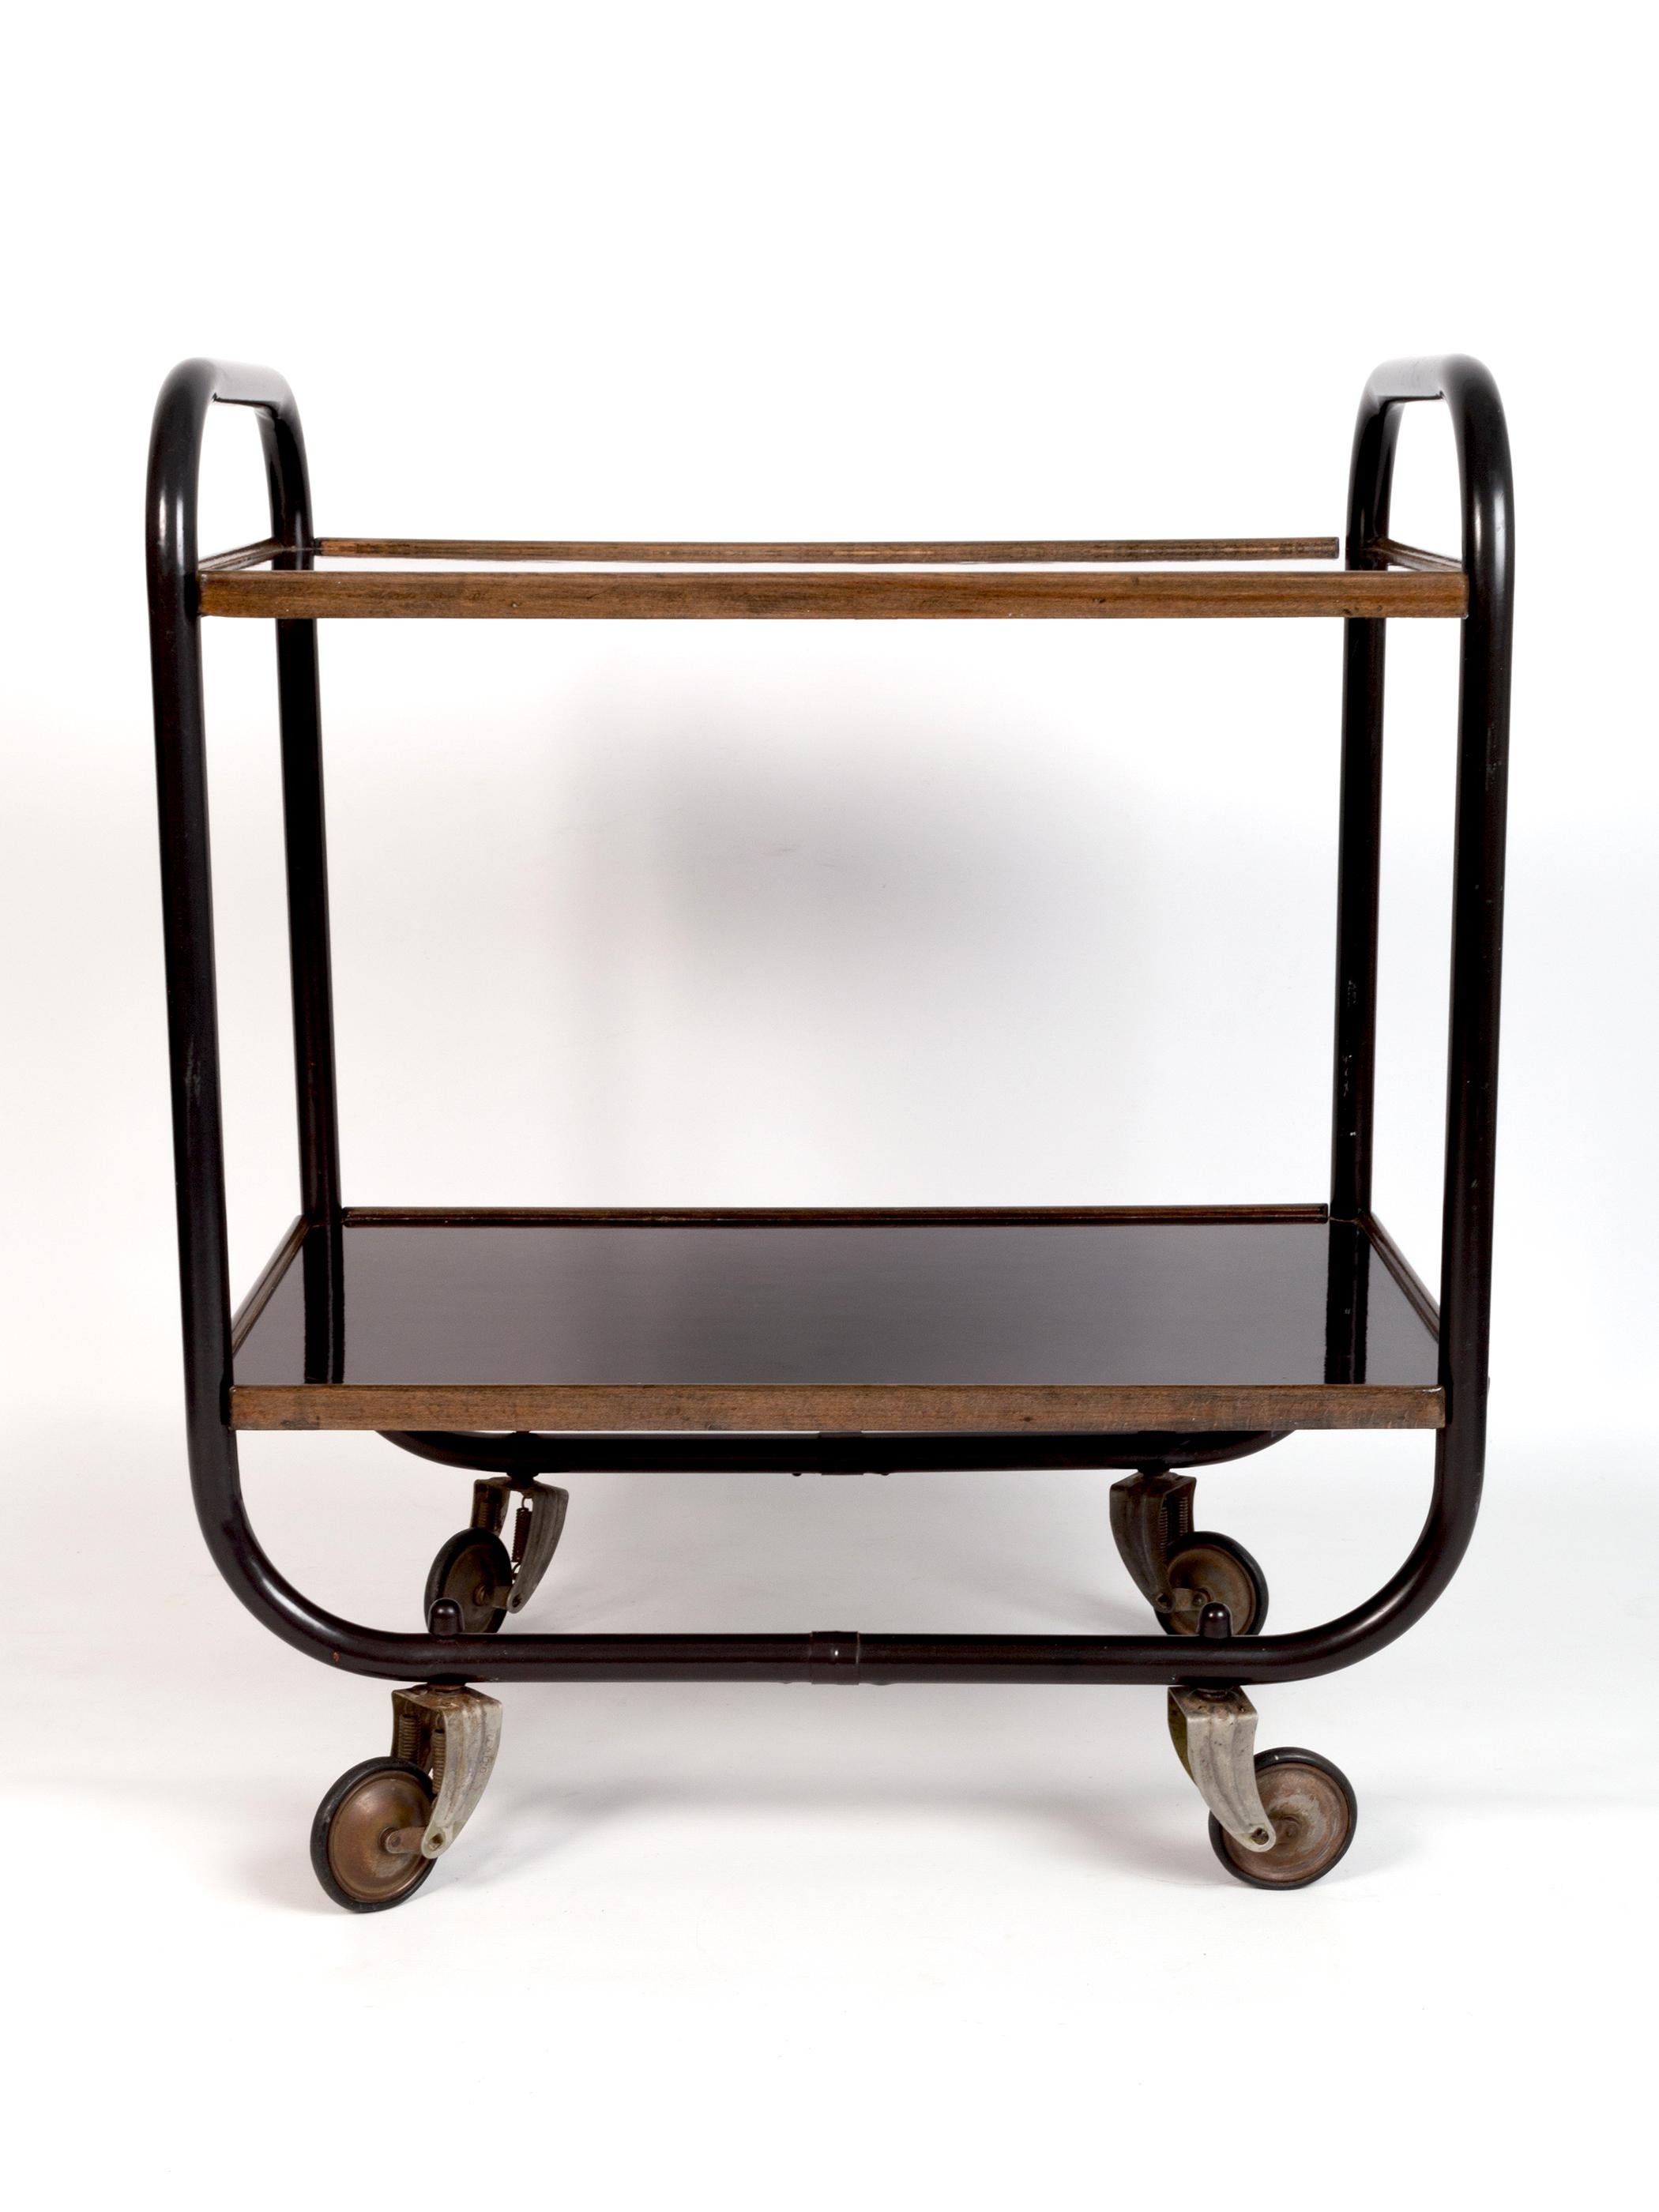 A mid century bar cart, England C.1950.

Designed by Frank Guille for Kandya. A stylish piece constructed from tubular steel with lacquered bakelite trays.

Kandya was at the forefront of British furniture manufacturing in the mid 20th century.